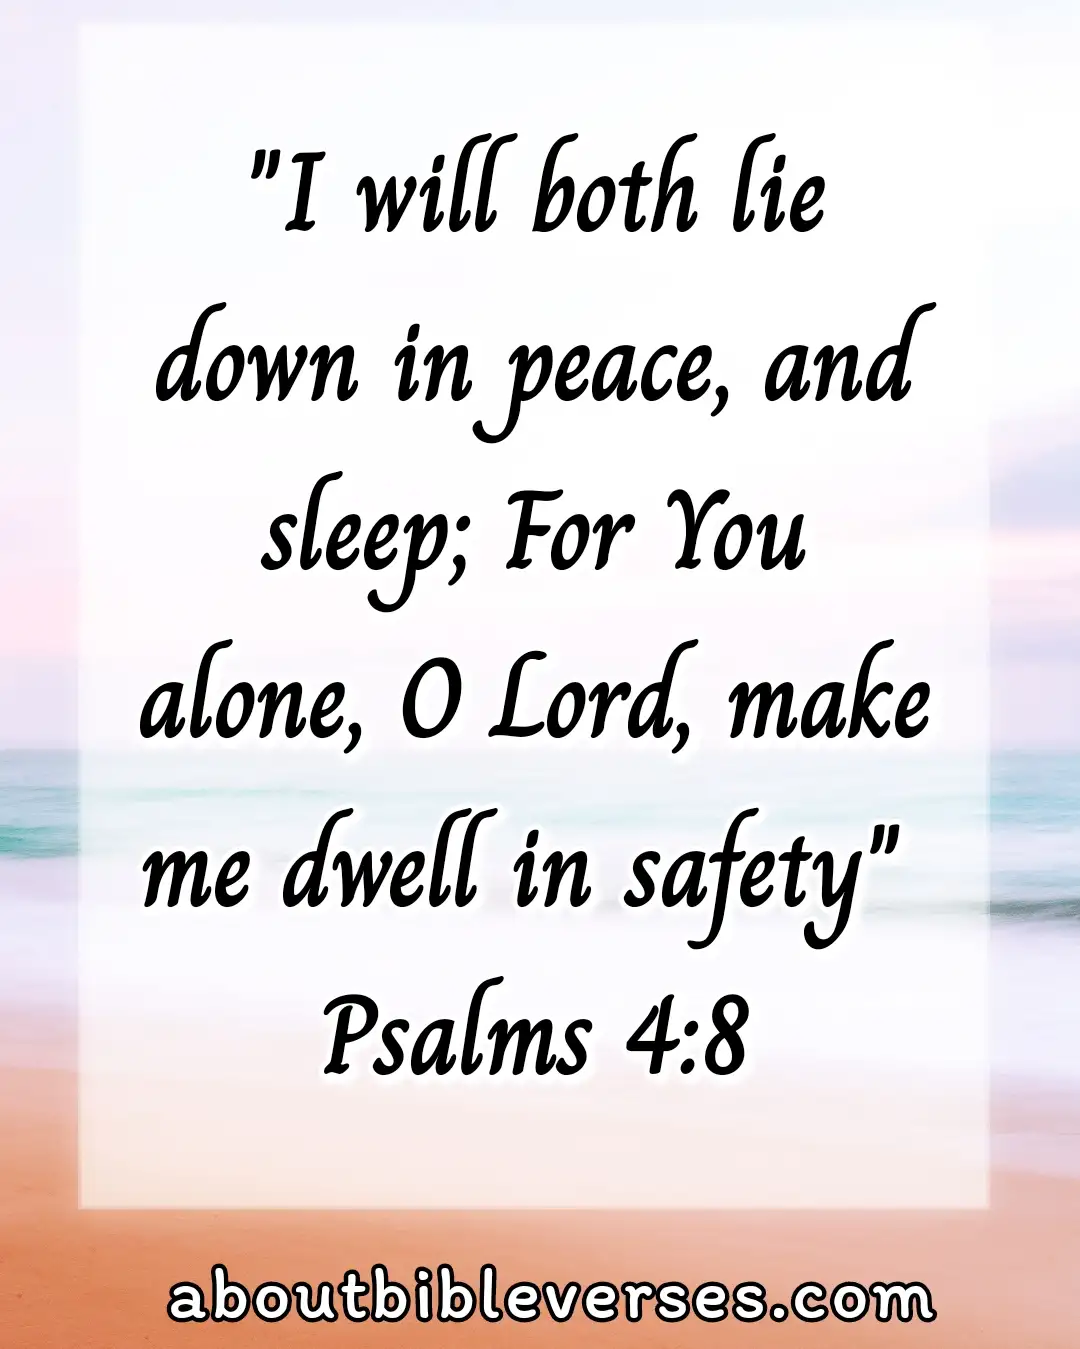 Bible Verses About Sleeping Too Much (Psalm 4:8)